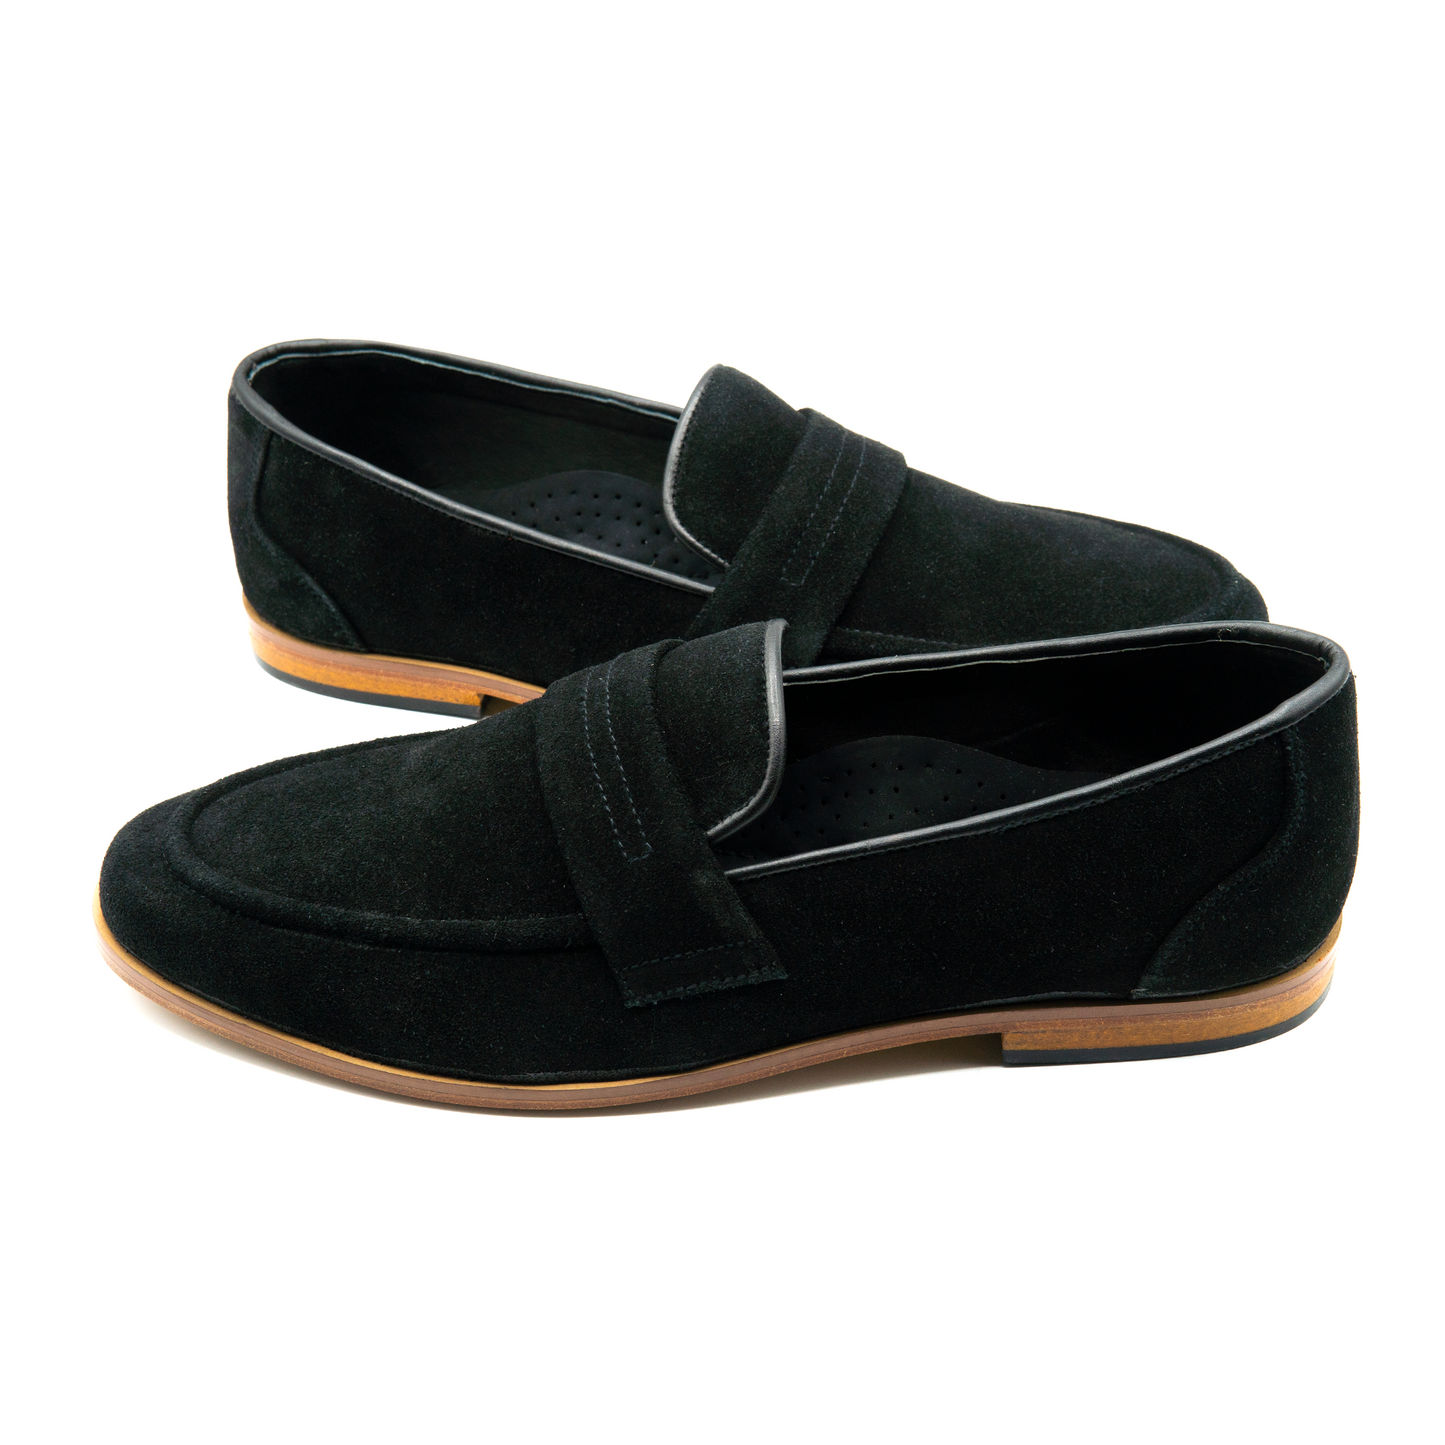 Black Suede Leather Executive Shoes